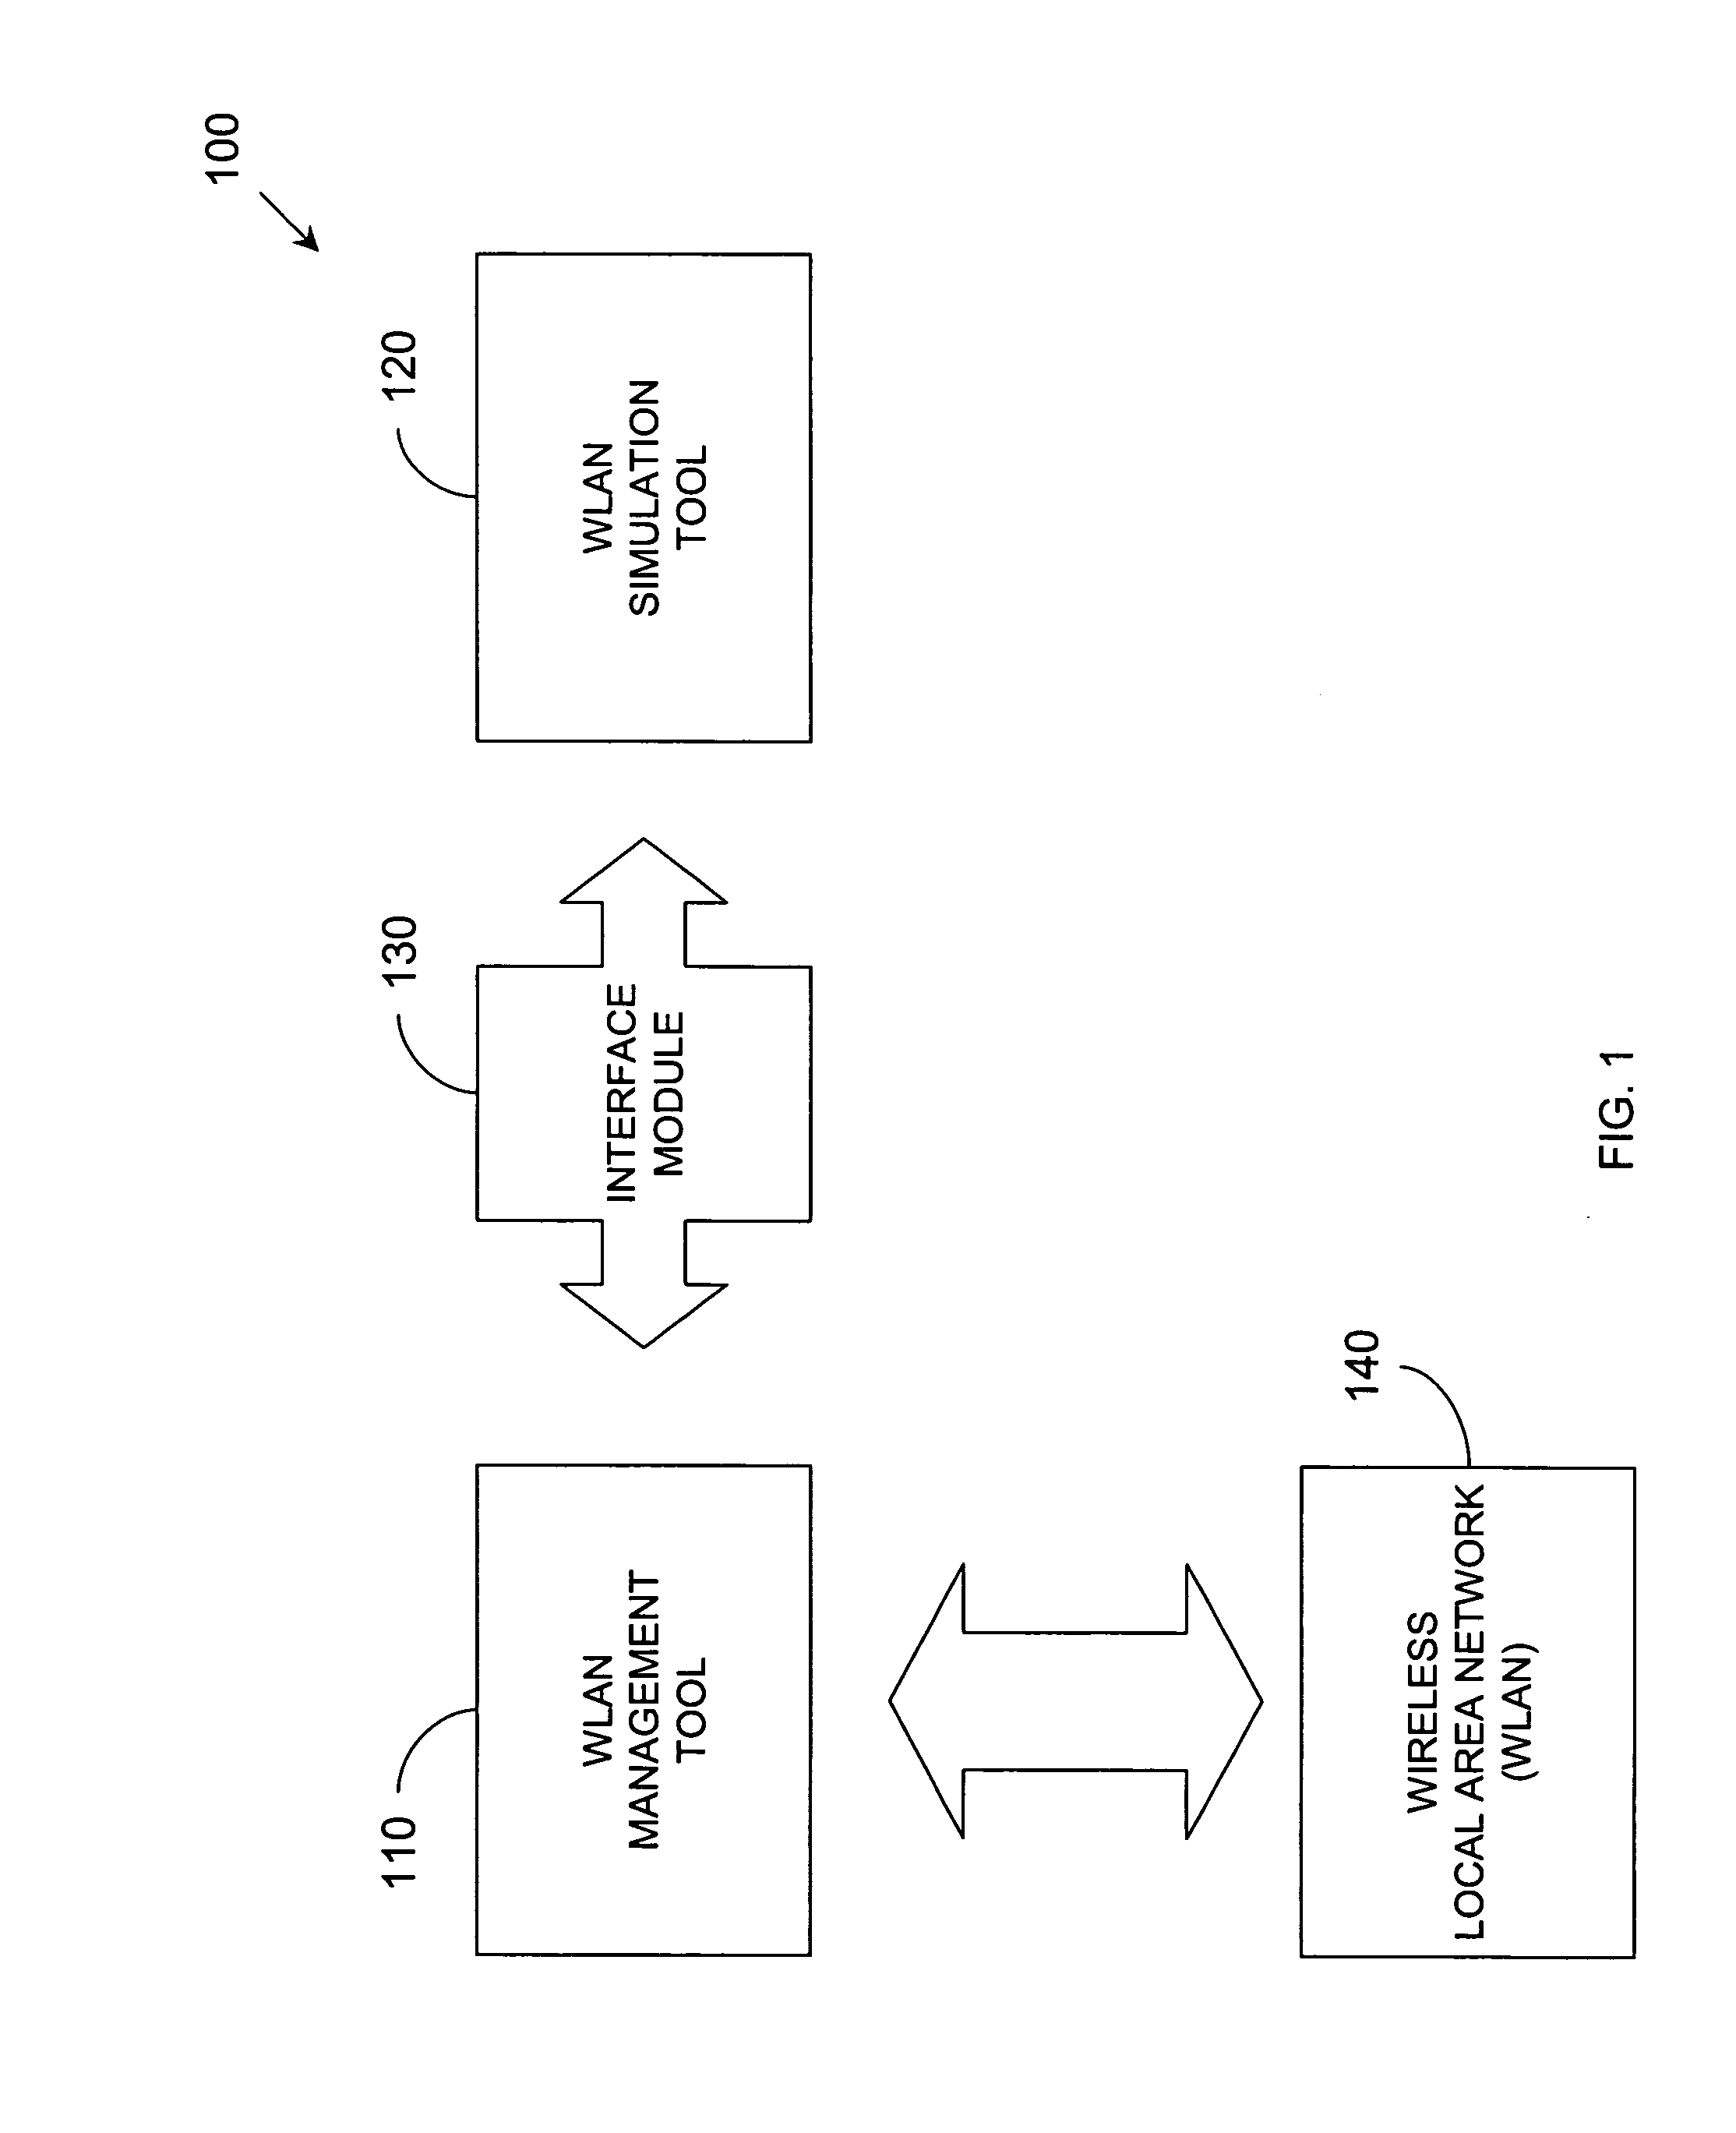 System and method to simulate and manage a wireless local area network (WLAN)